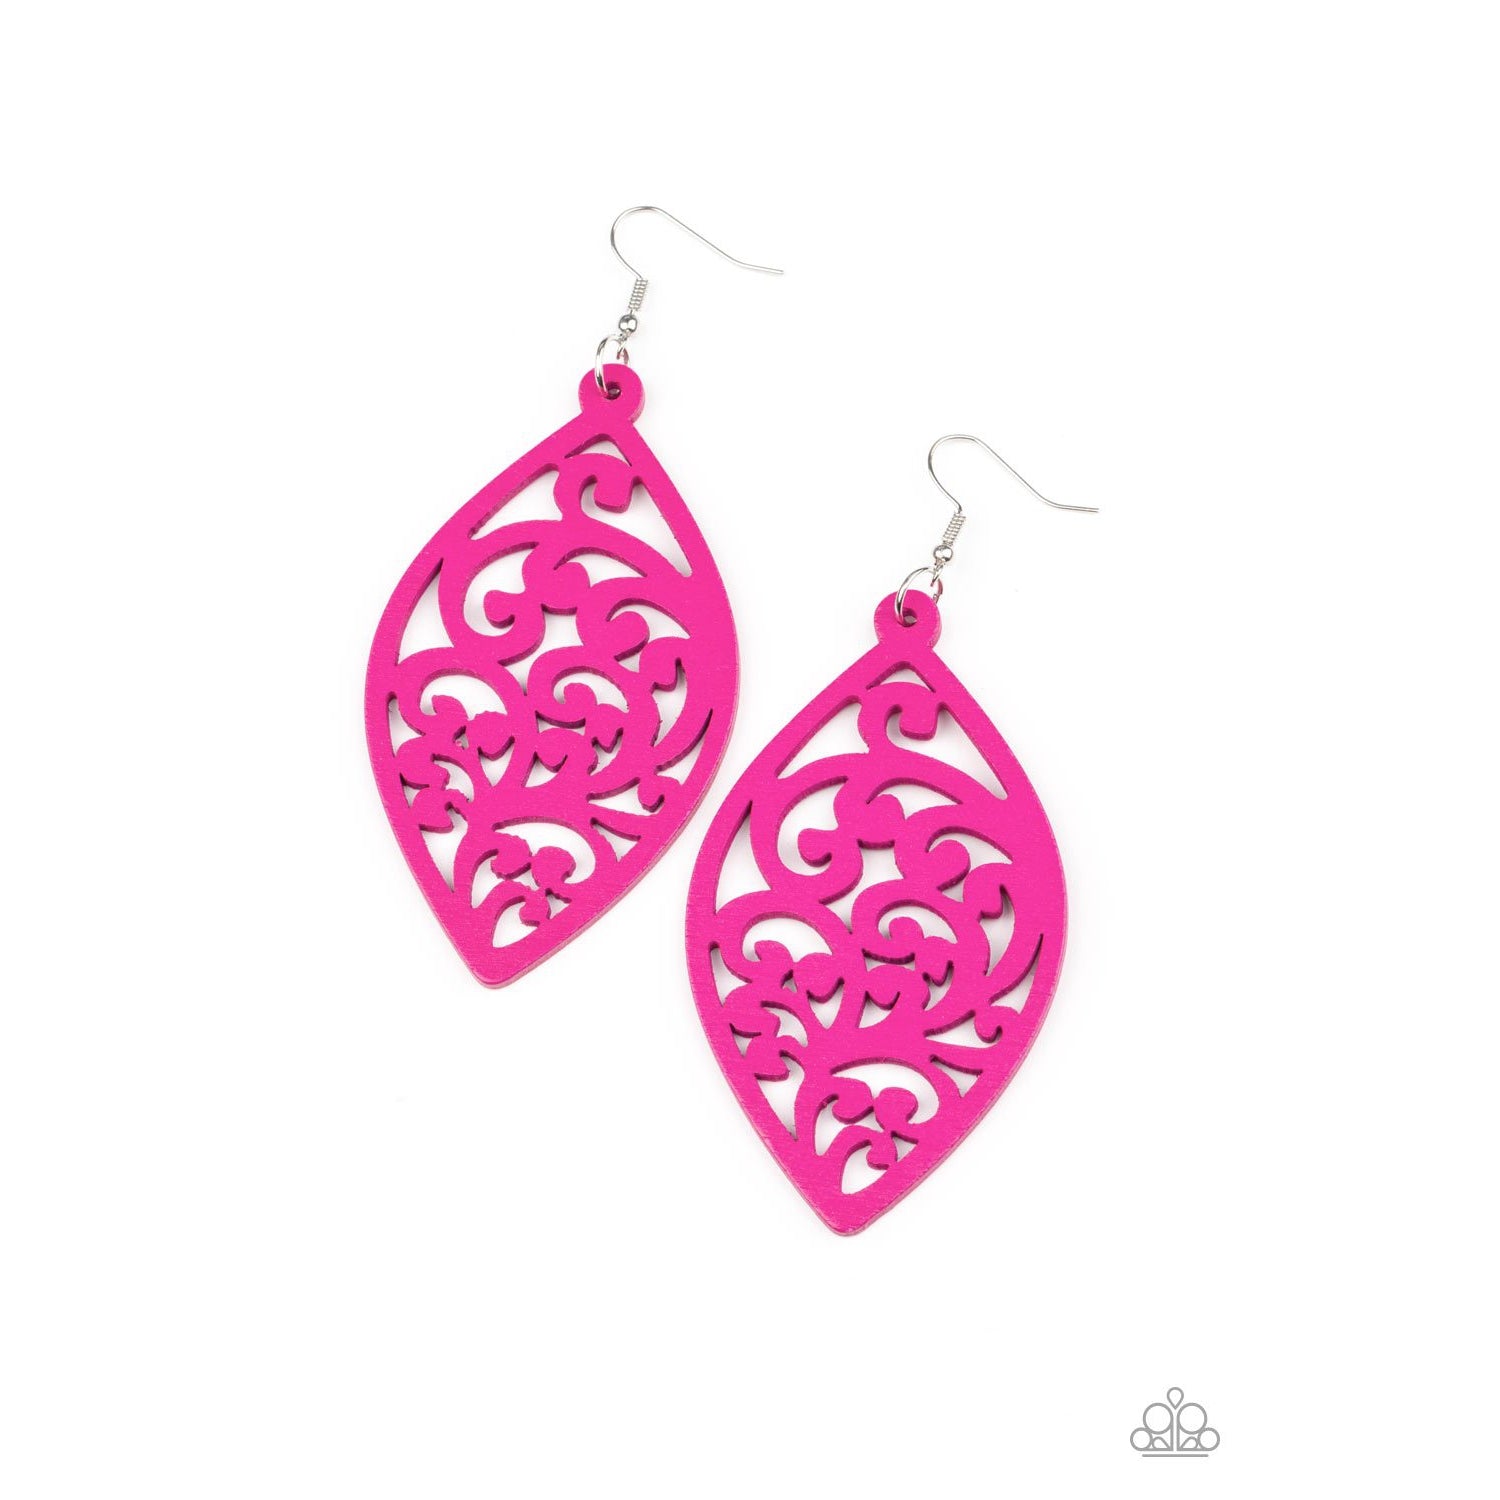 Coral Garden - Pink Wooden Earrings - Paparazzi Accessories - GlaMarous Titi Jewels